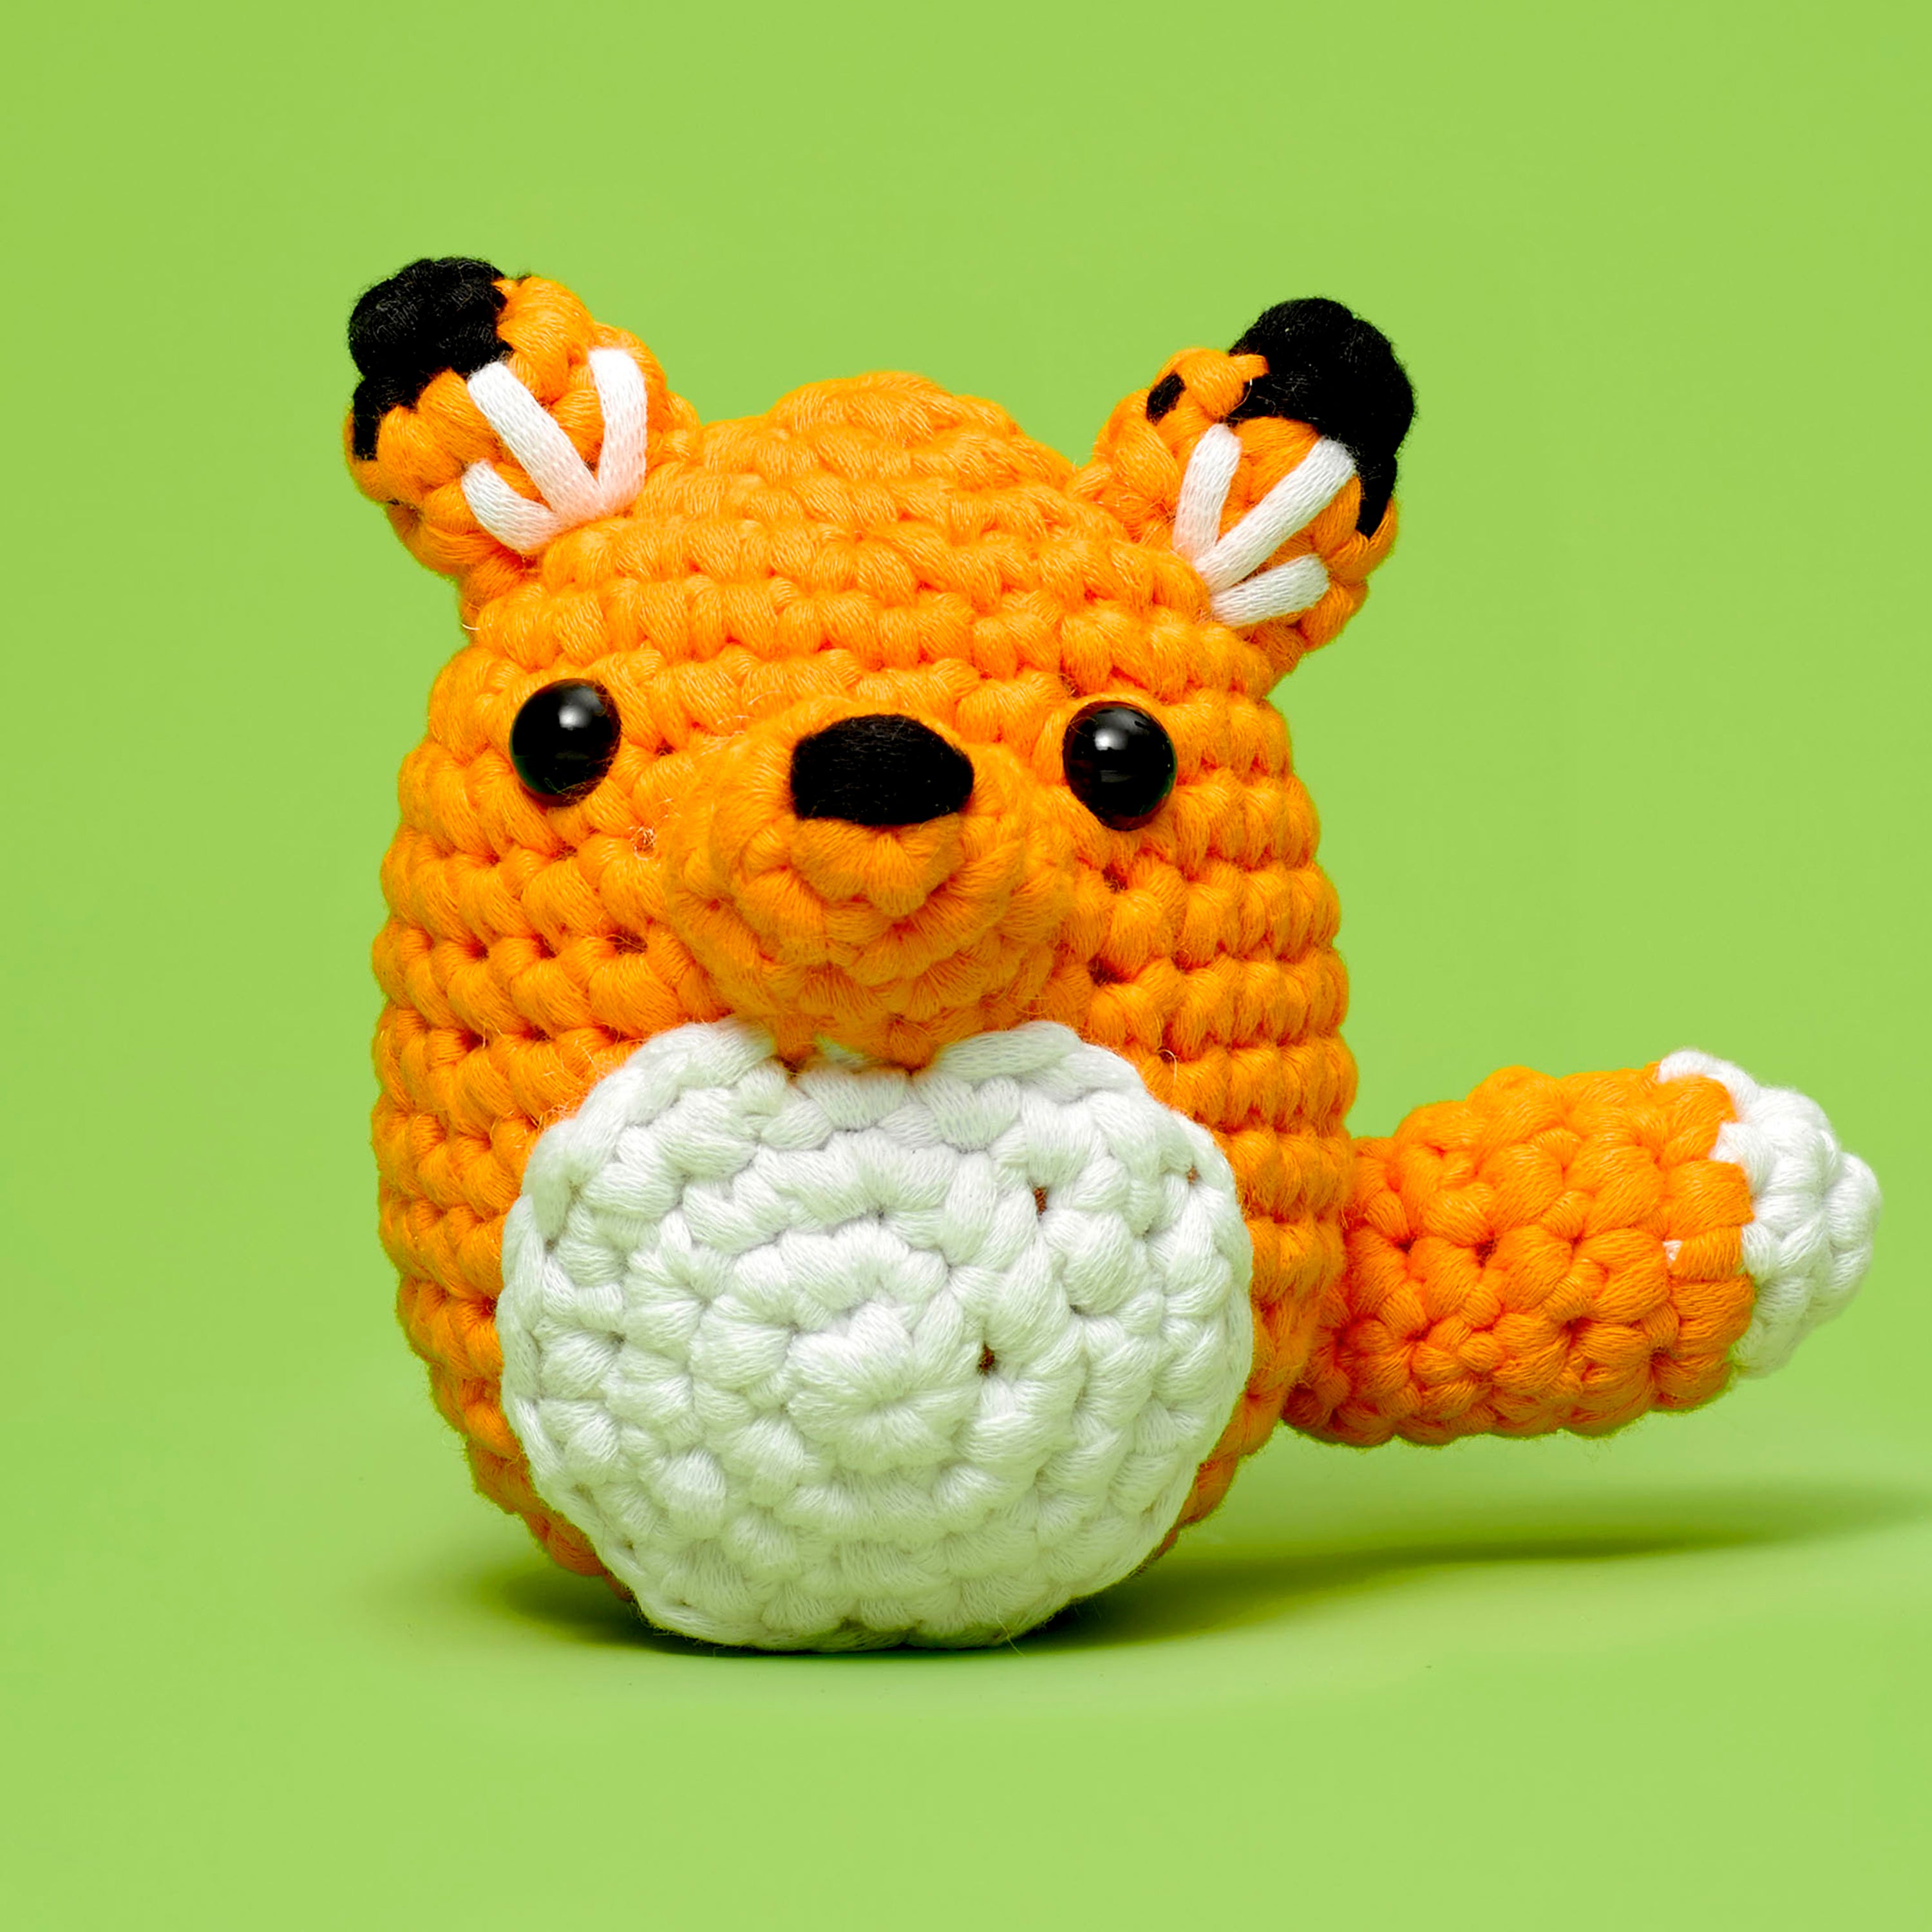 Crochet Kits for Beginners - All-in-One Stuffed Animal Knitting Sets -  Step-by-Step Video Tutorials DIY, The Chick Crochet Kits for Kids and Adults